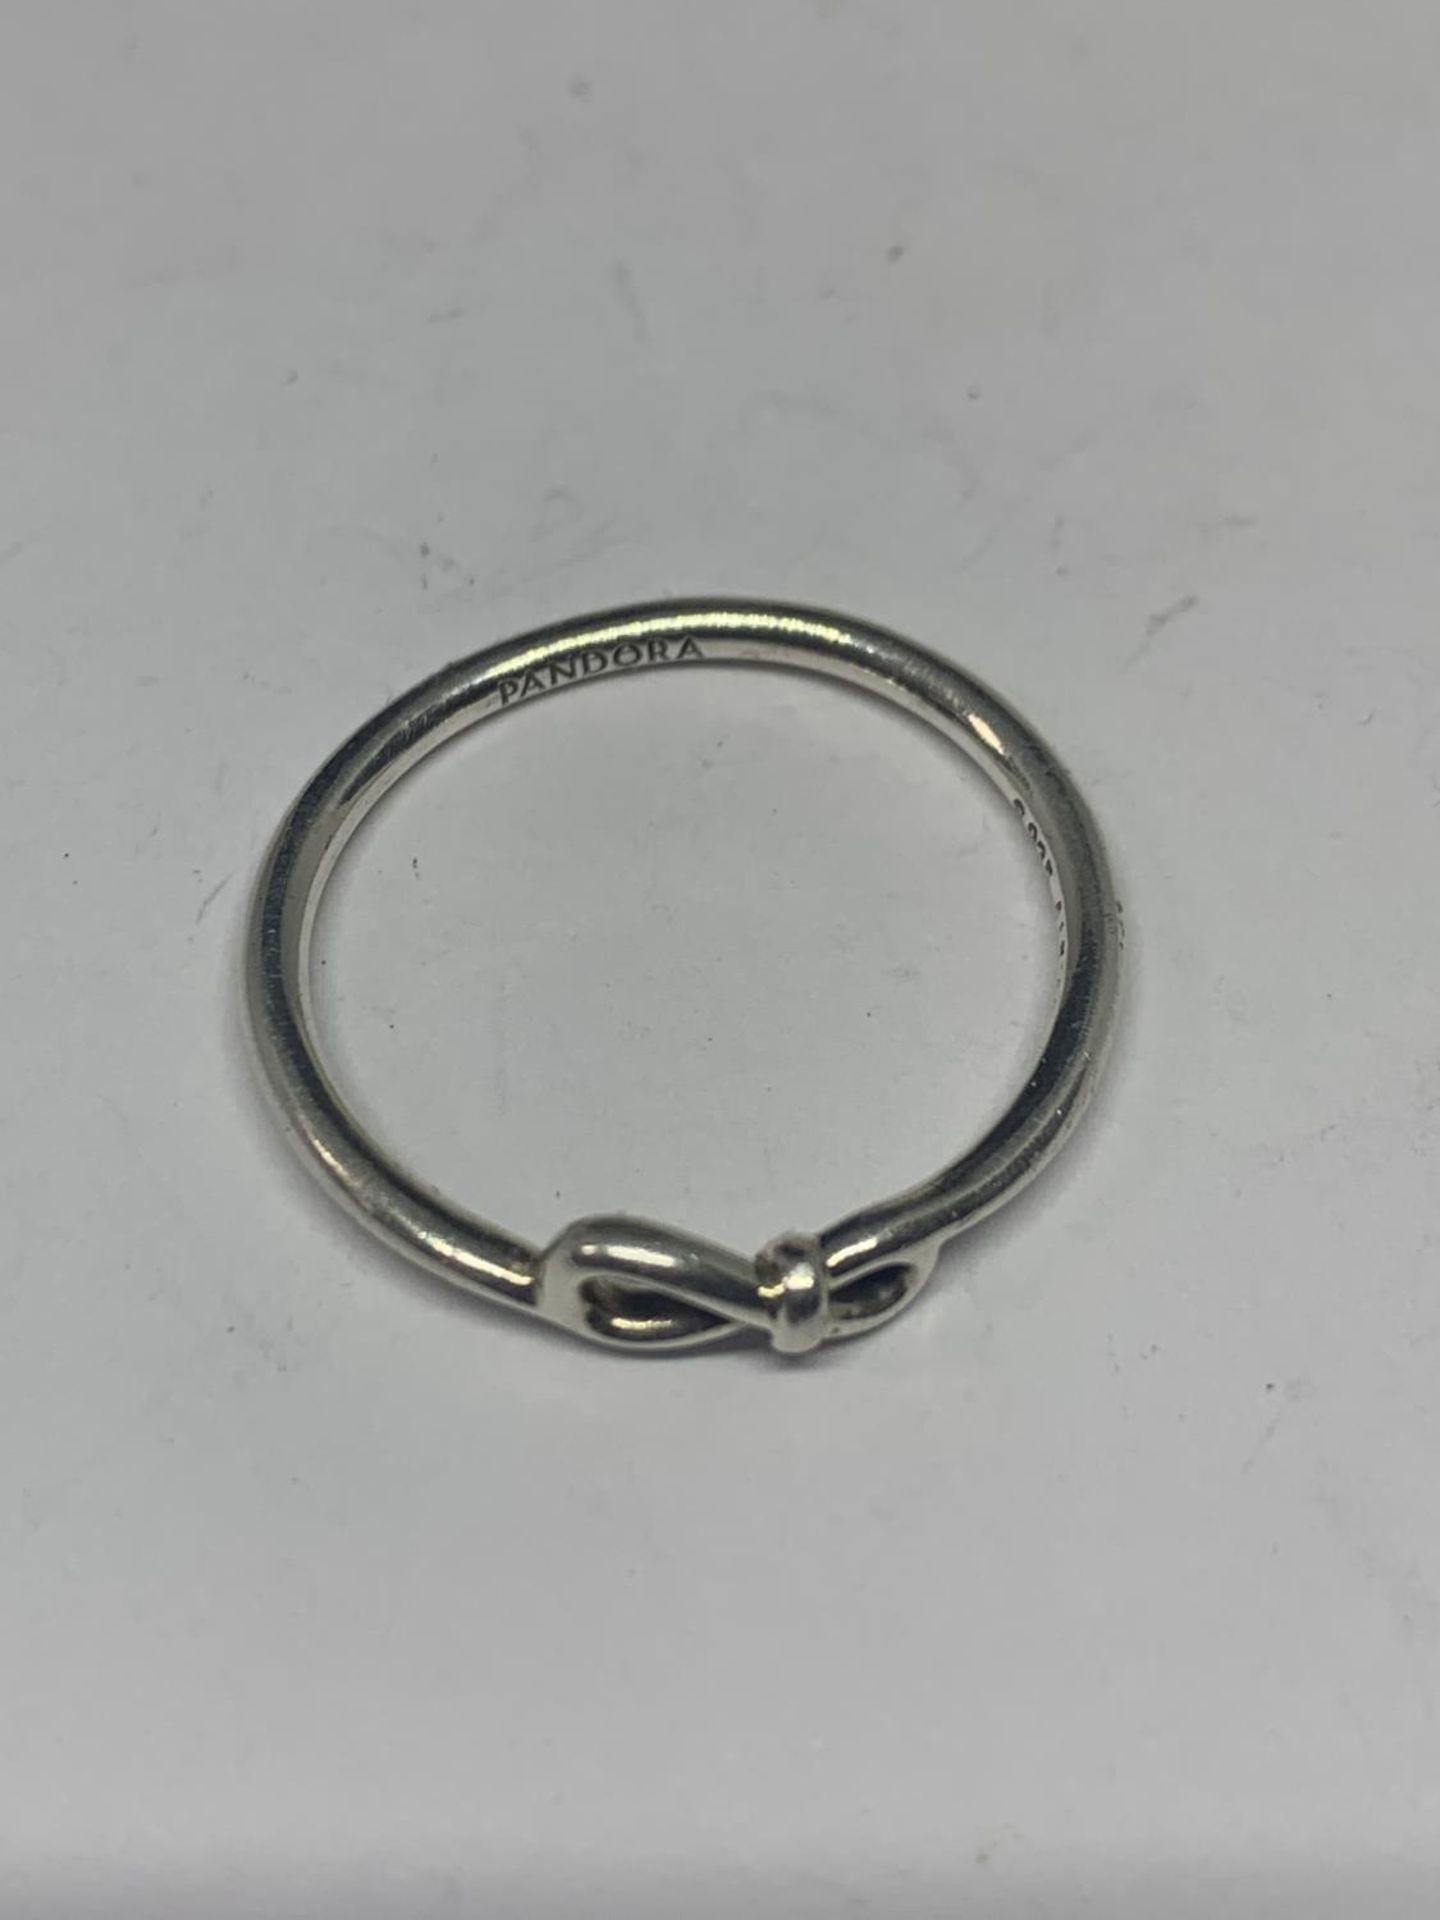 A BOXED PANDORA SILVER RING SIZE S - Image 3 of 6